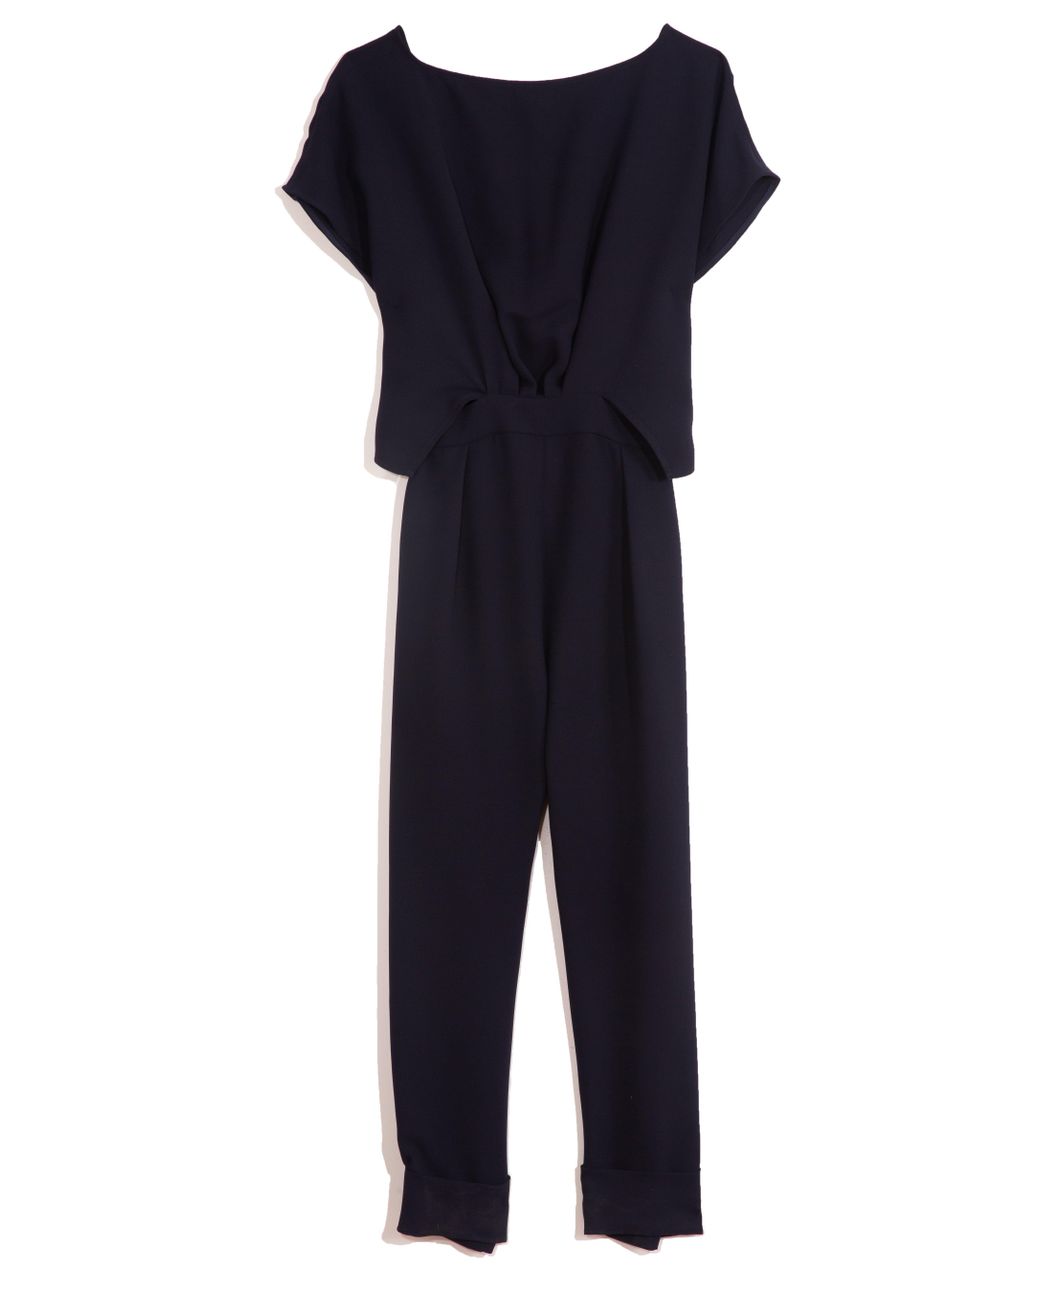 The Perfect Jumpsuit.